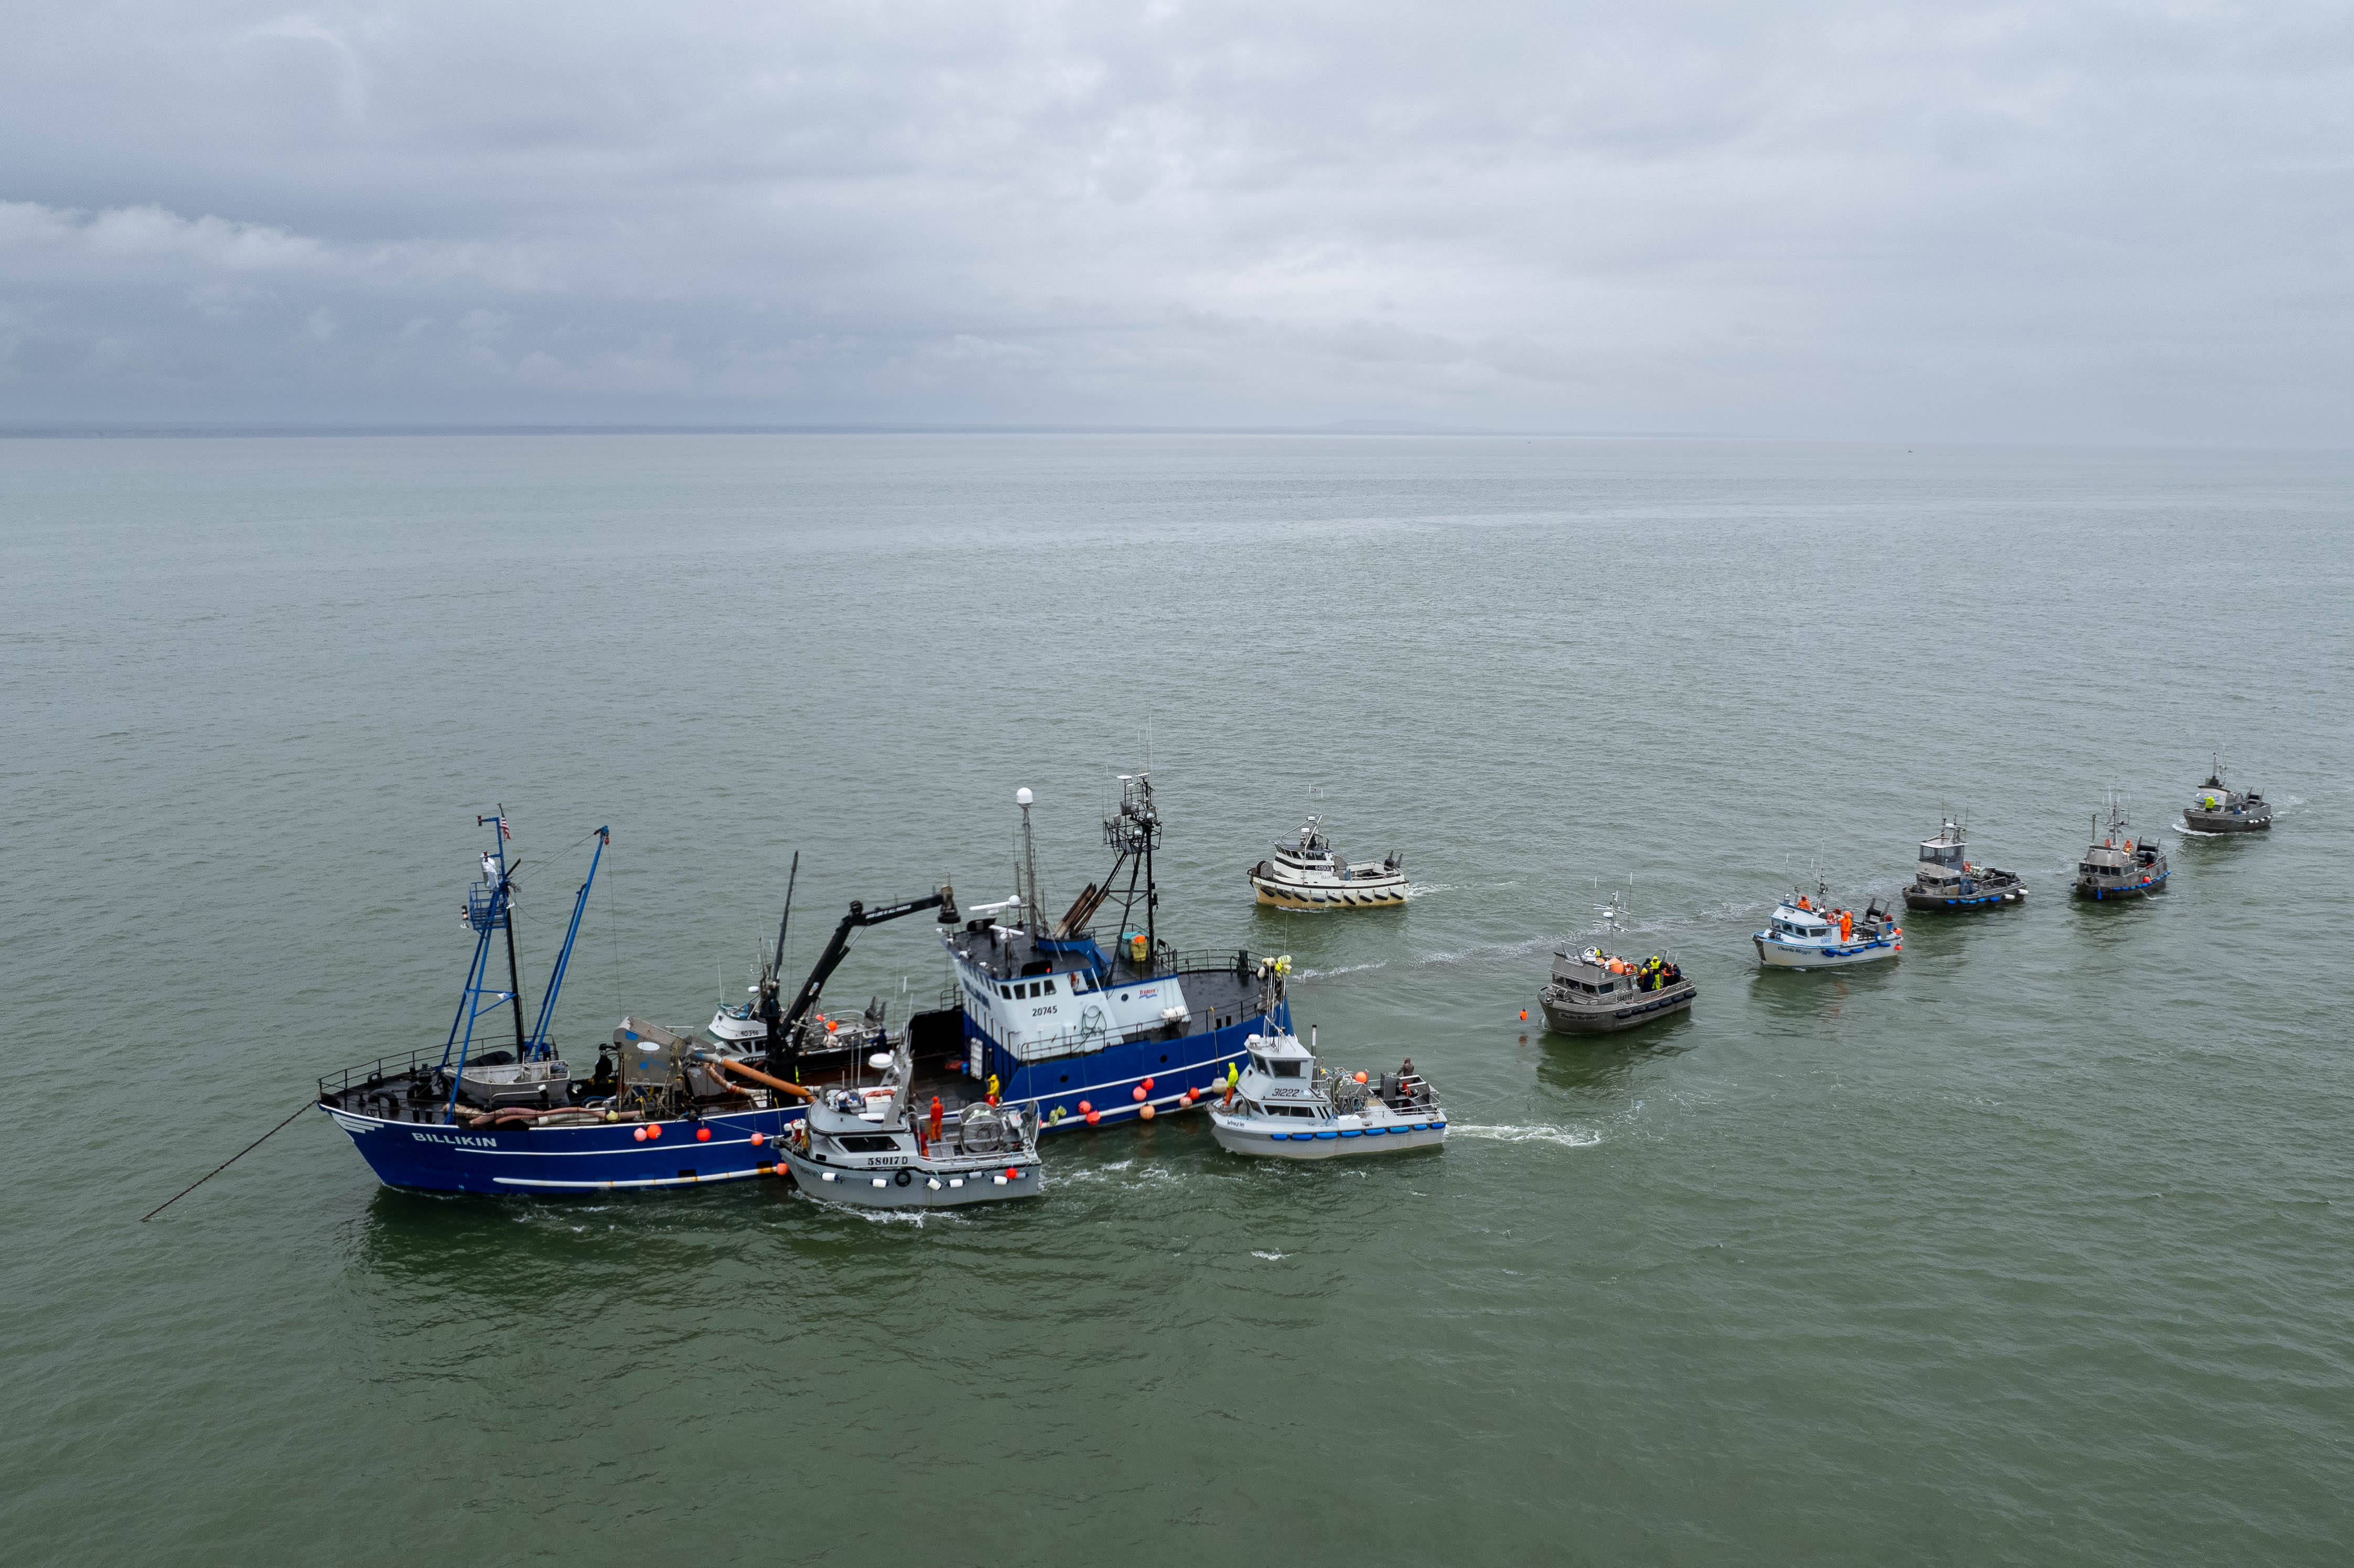 Alaska commercial fishing industry goes 1 year without a fatality